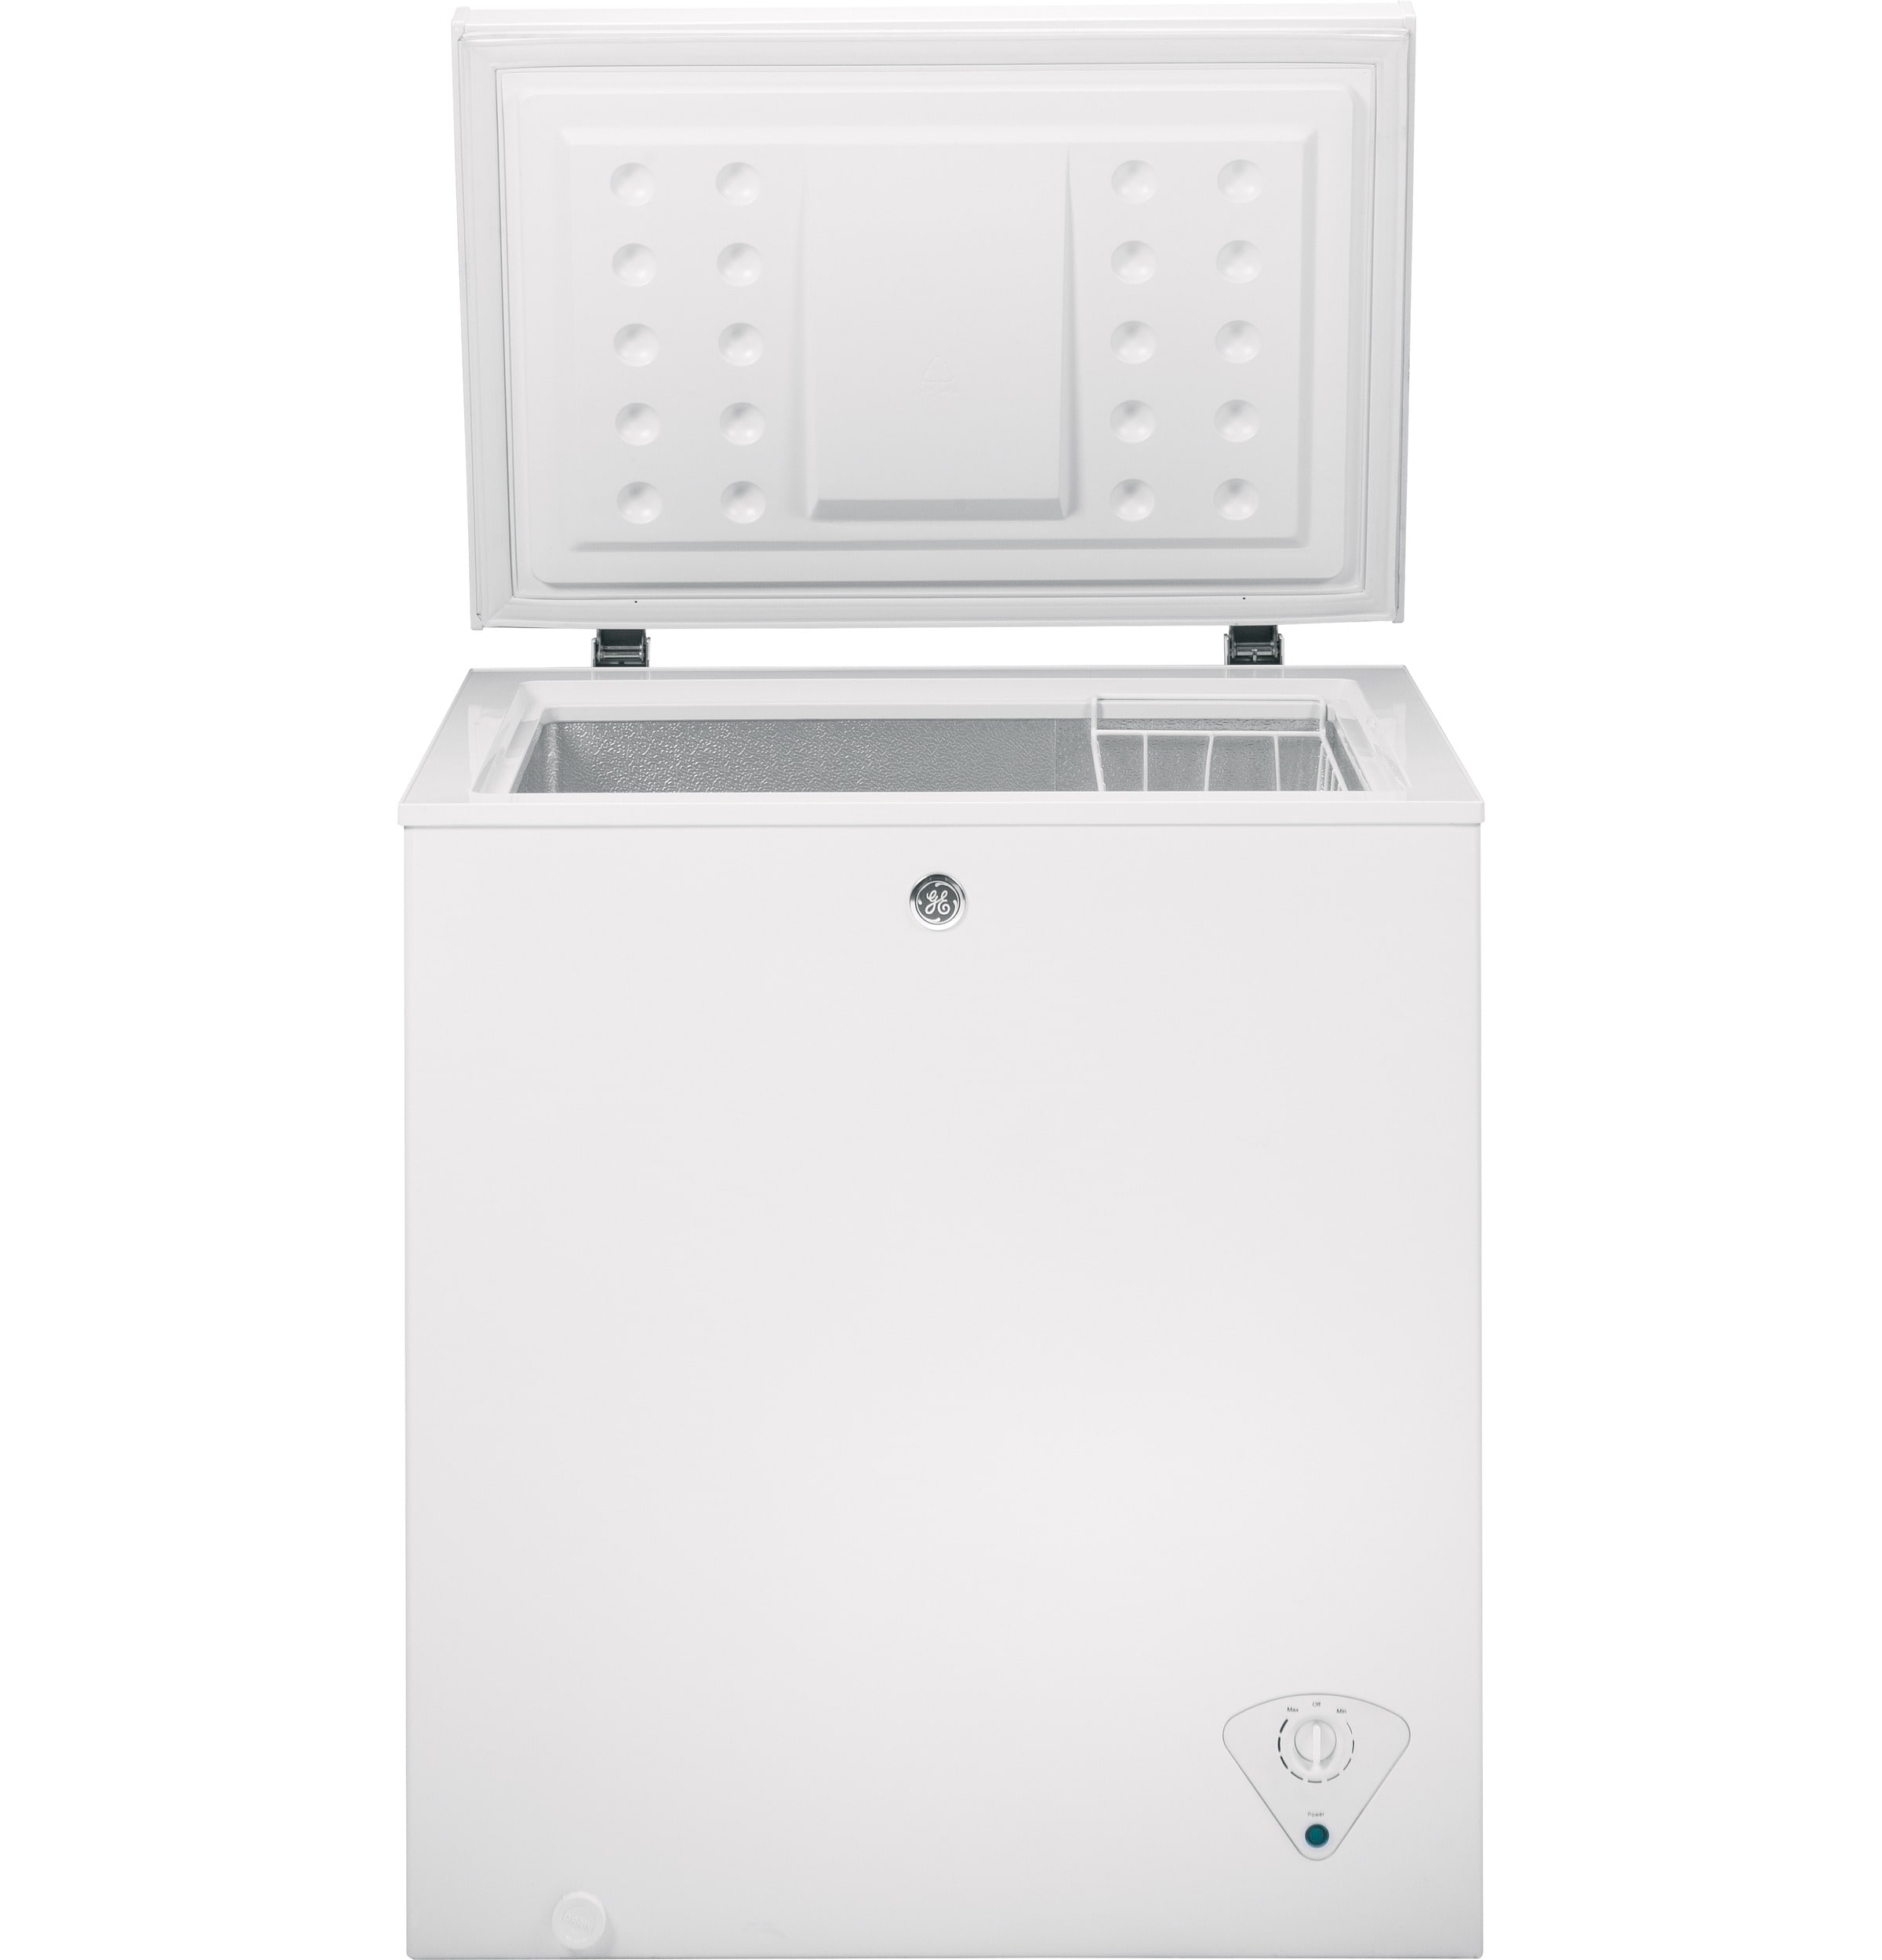 Small chest freezers at Lowes.com: Search Results